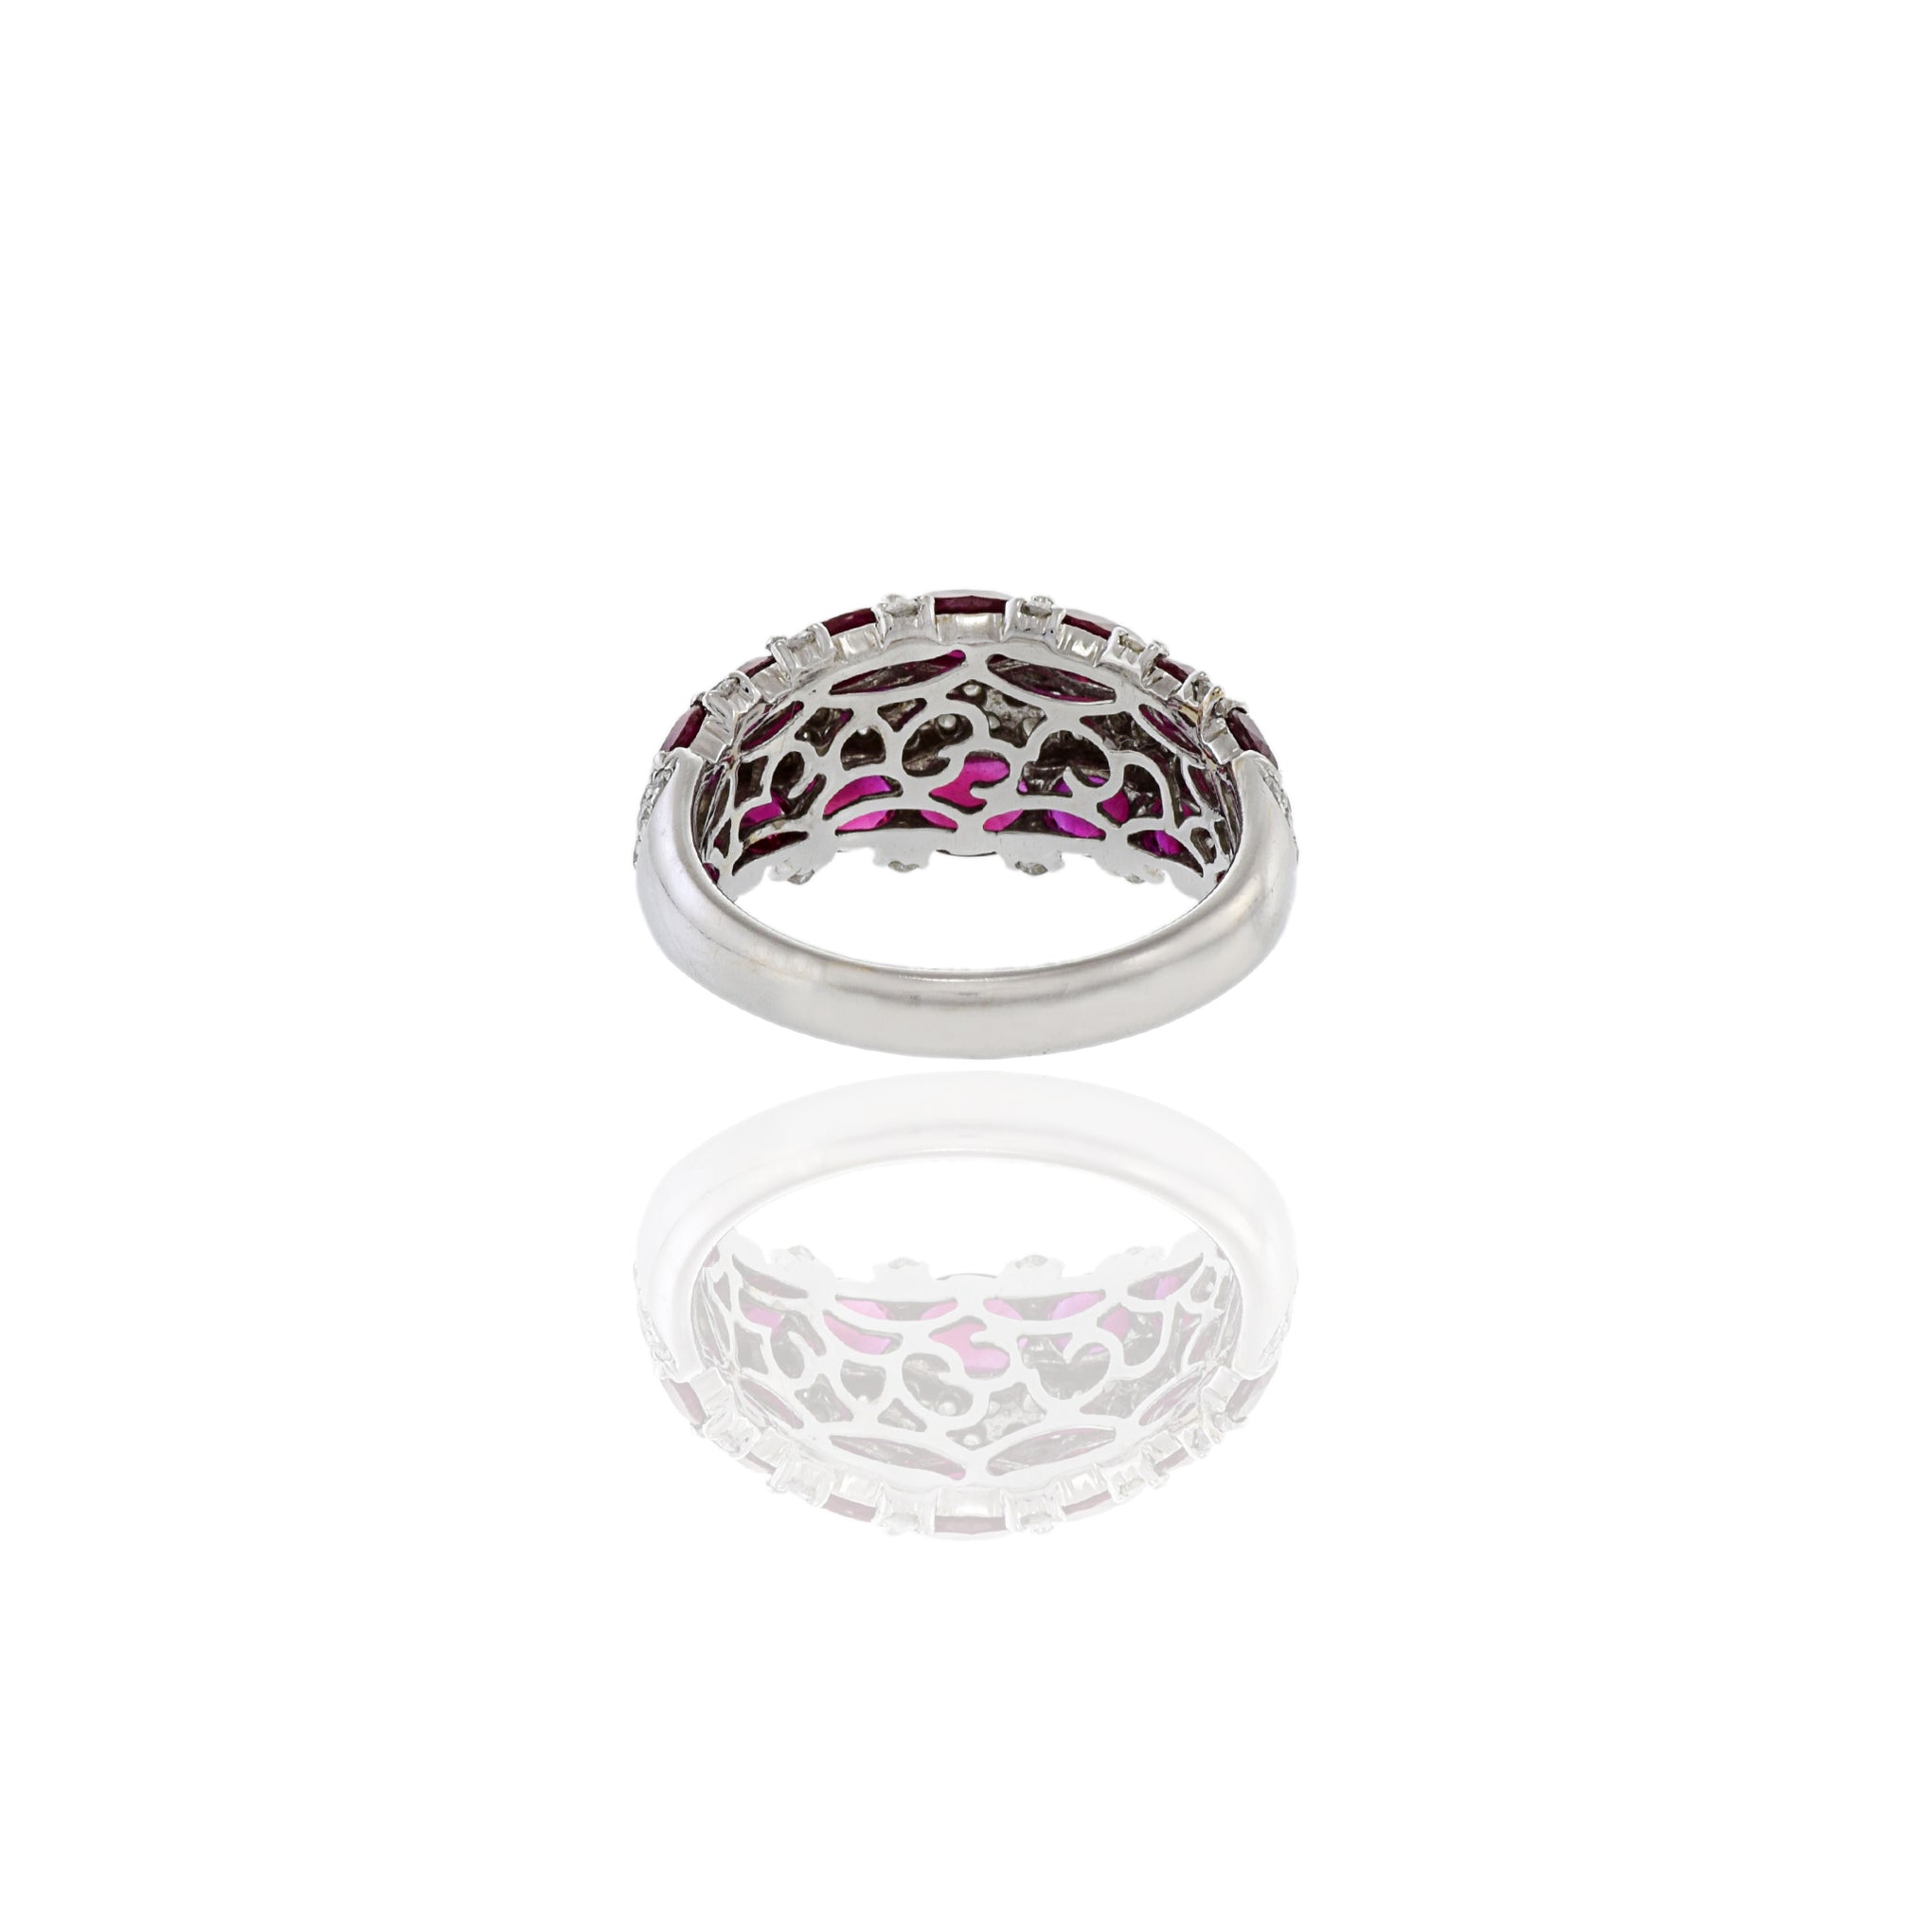 Estate 18KT White Gold Ruby And Pave Diamond Ring